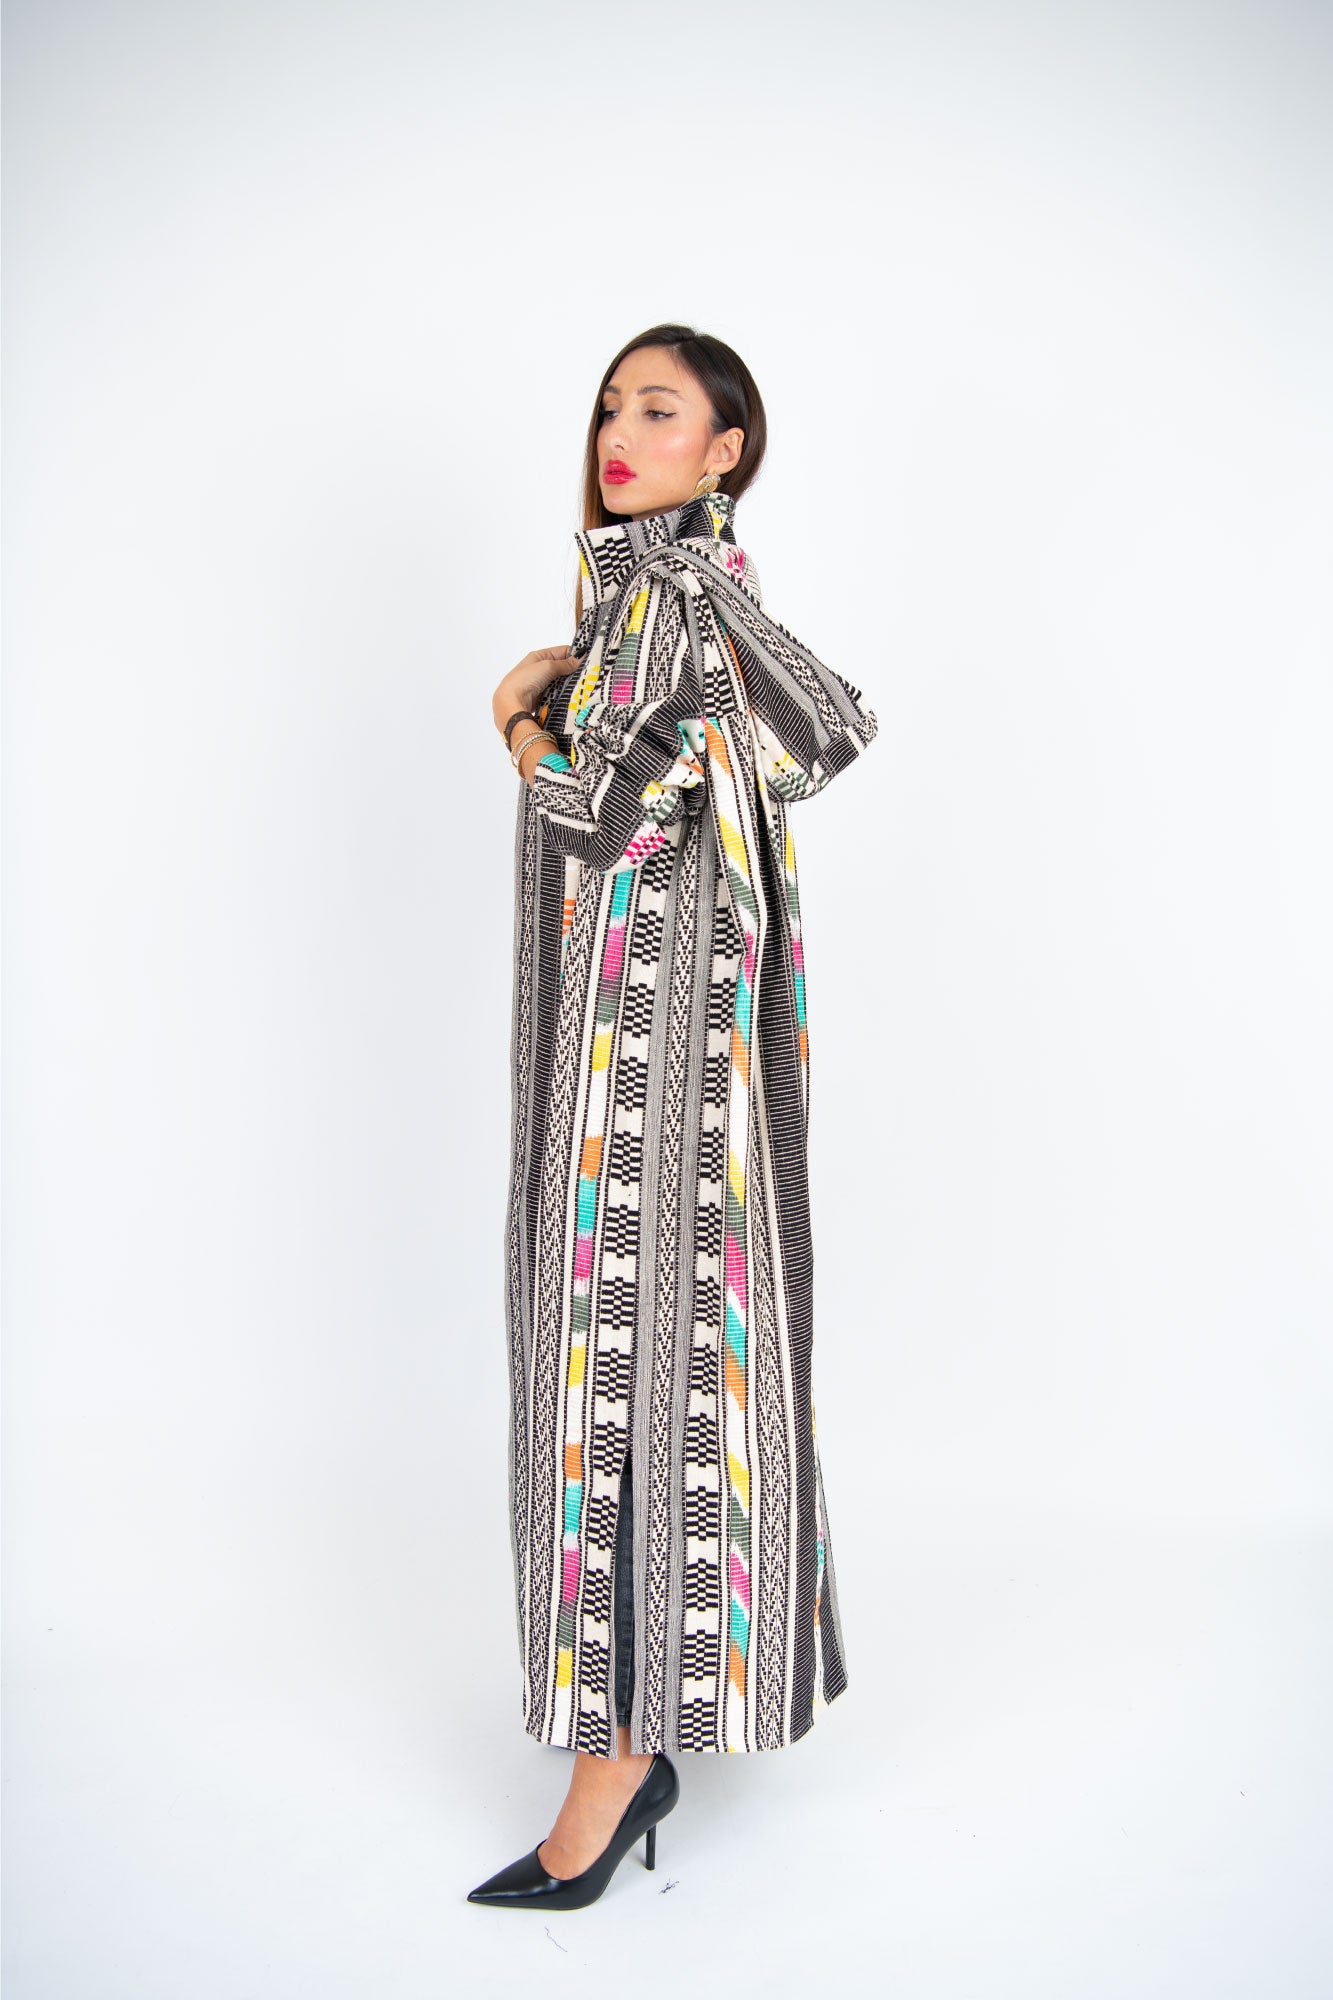 Colorful Winter Abaya with Bold Geometric Patterns for a Vibrant Look